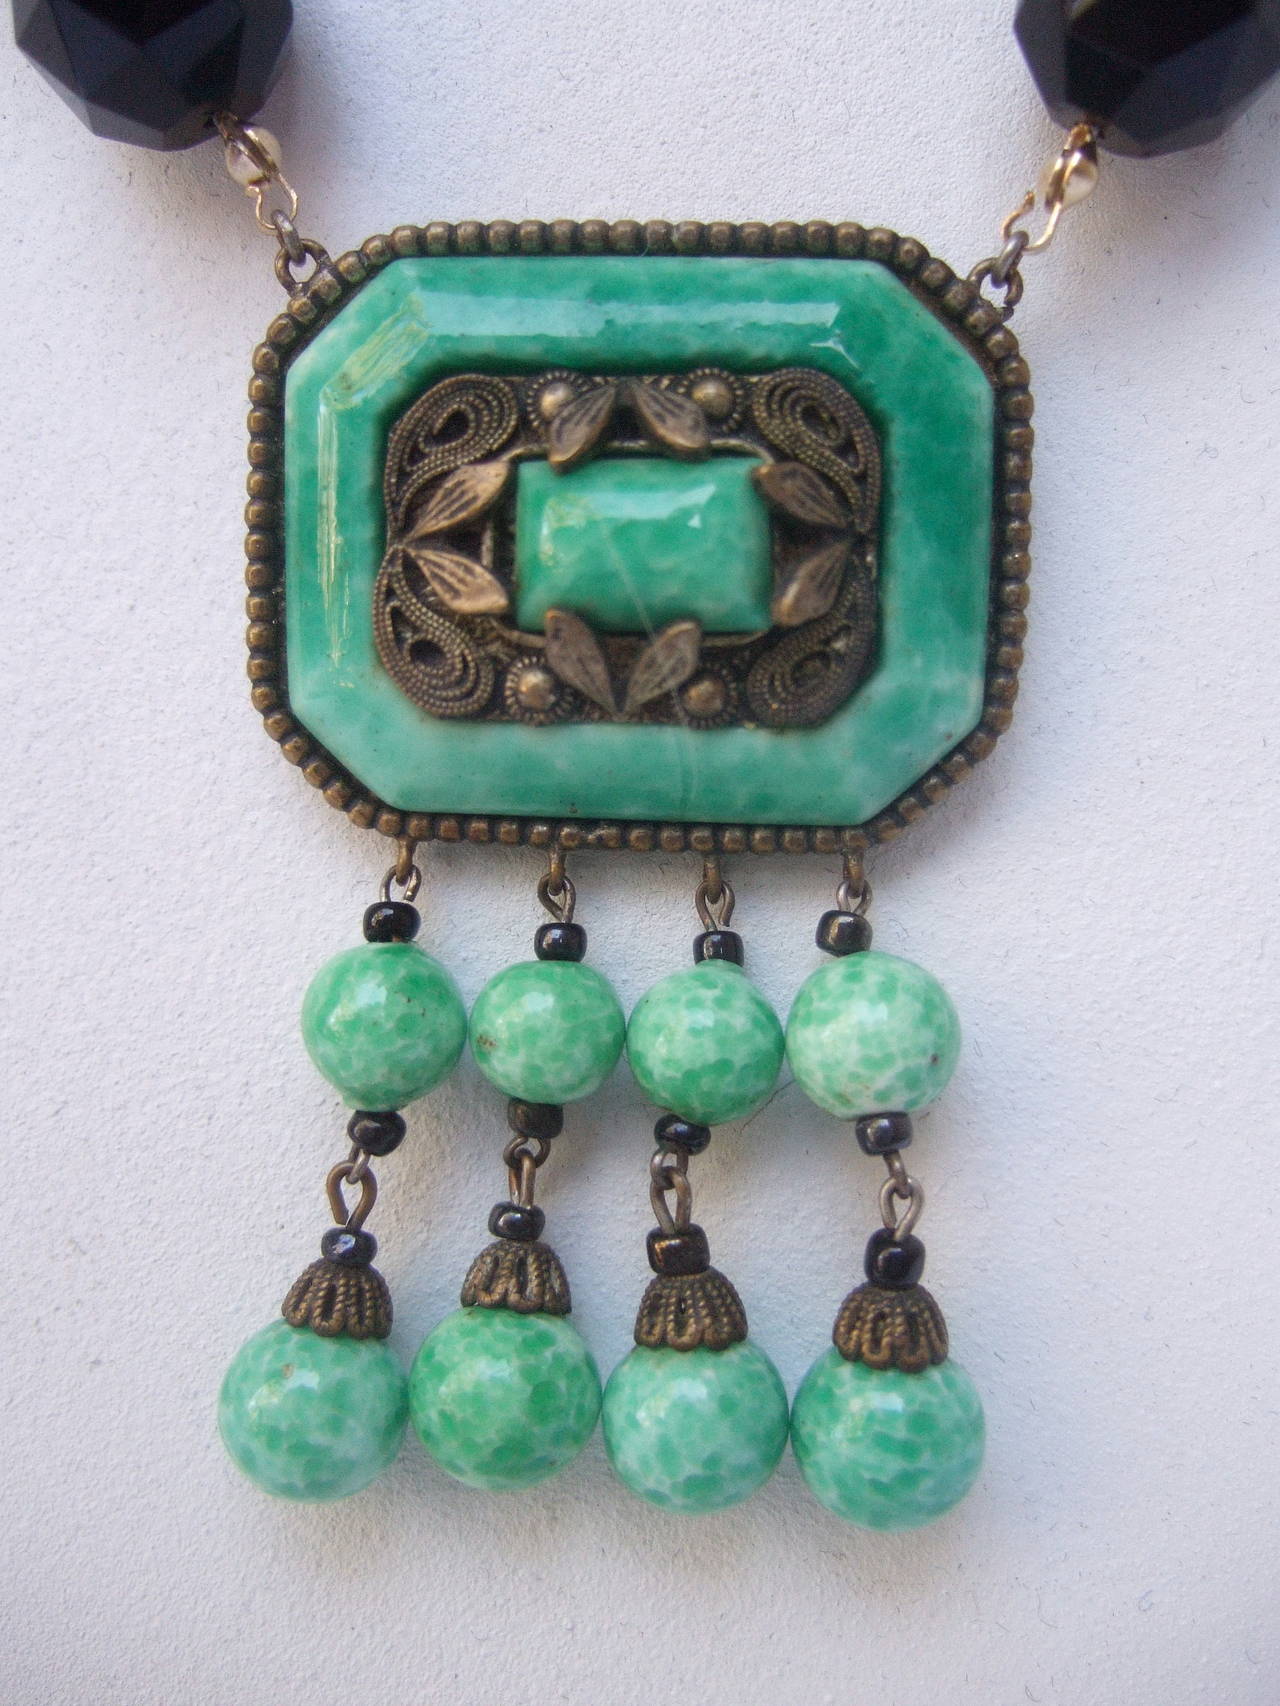 Art Deco Egyptian revival glass beaded necklace c 1930
The opulent necklace is designed with jade color opaque round glass beads interspersed with faceted black jet glass beads

The two graduated rows of glass beads transition into a rectangular